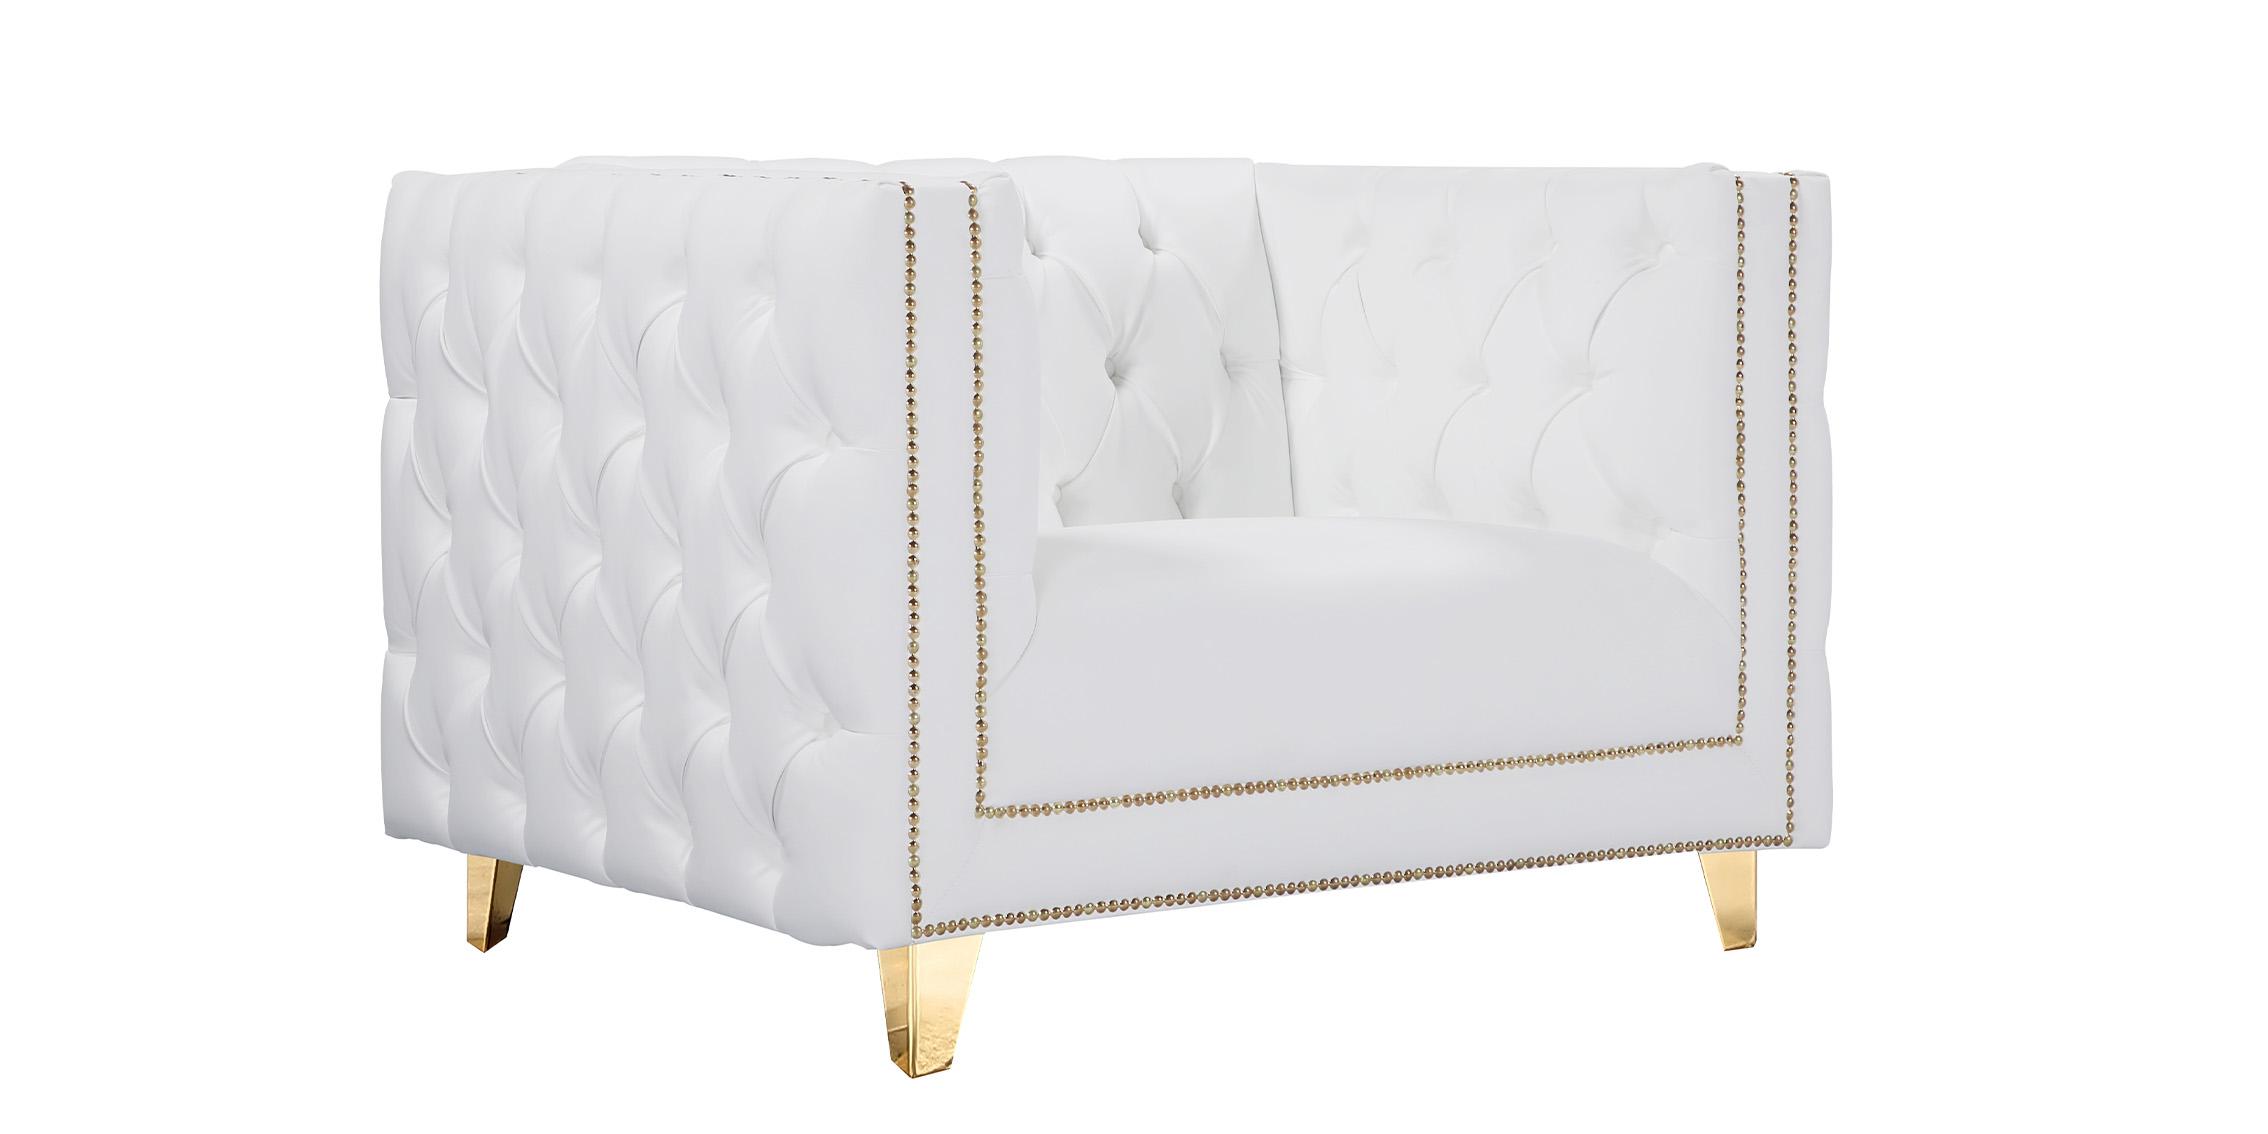 Contemporary, Modern Arm Chair MICHELLE 651White-C 651White-C in White, Gold Faux Leather